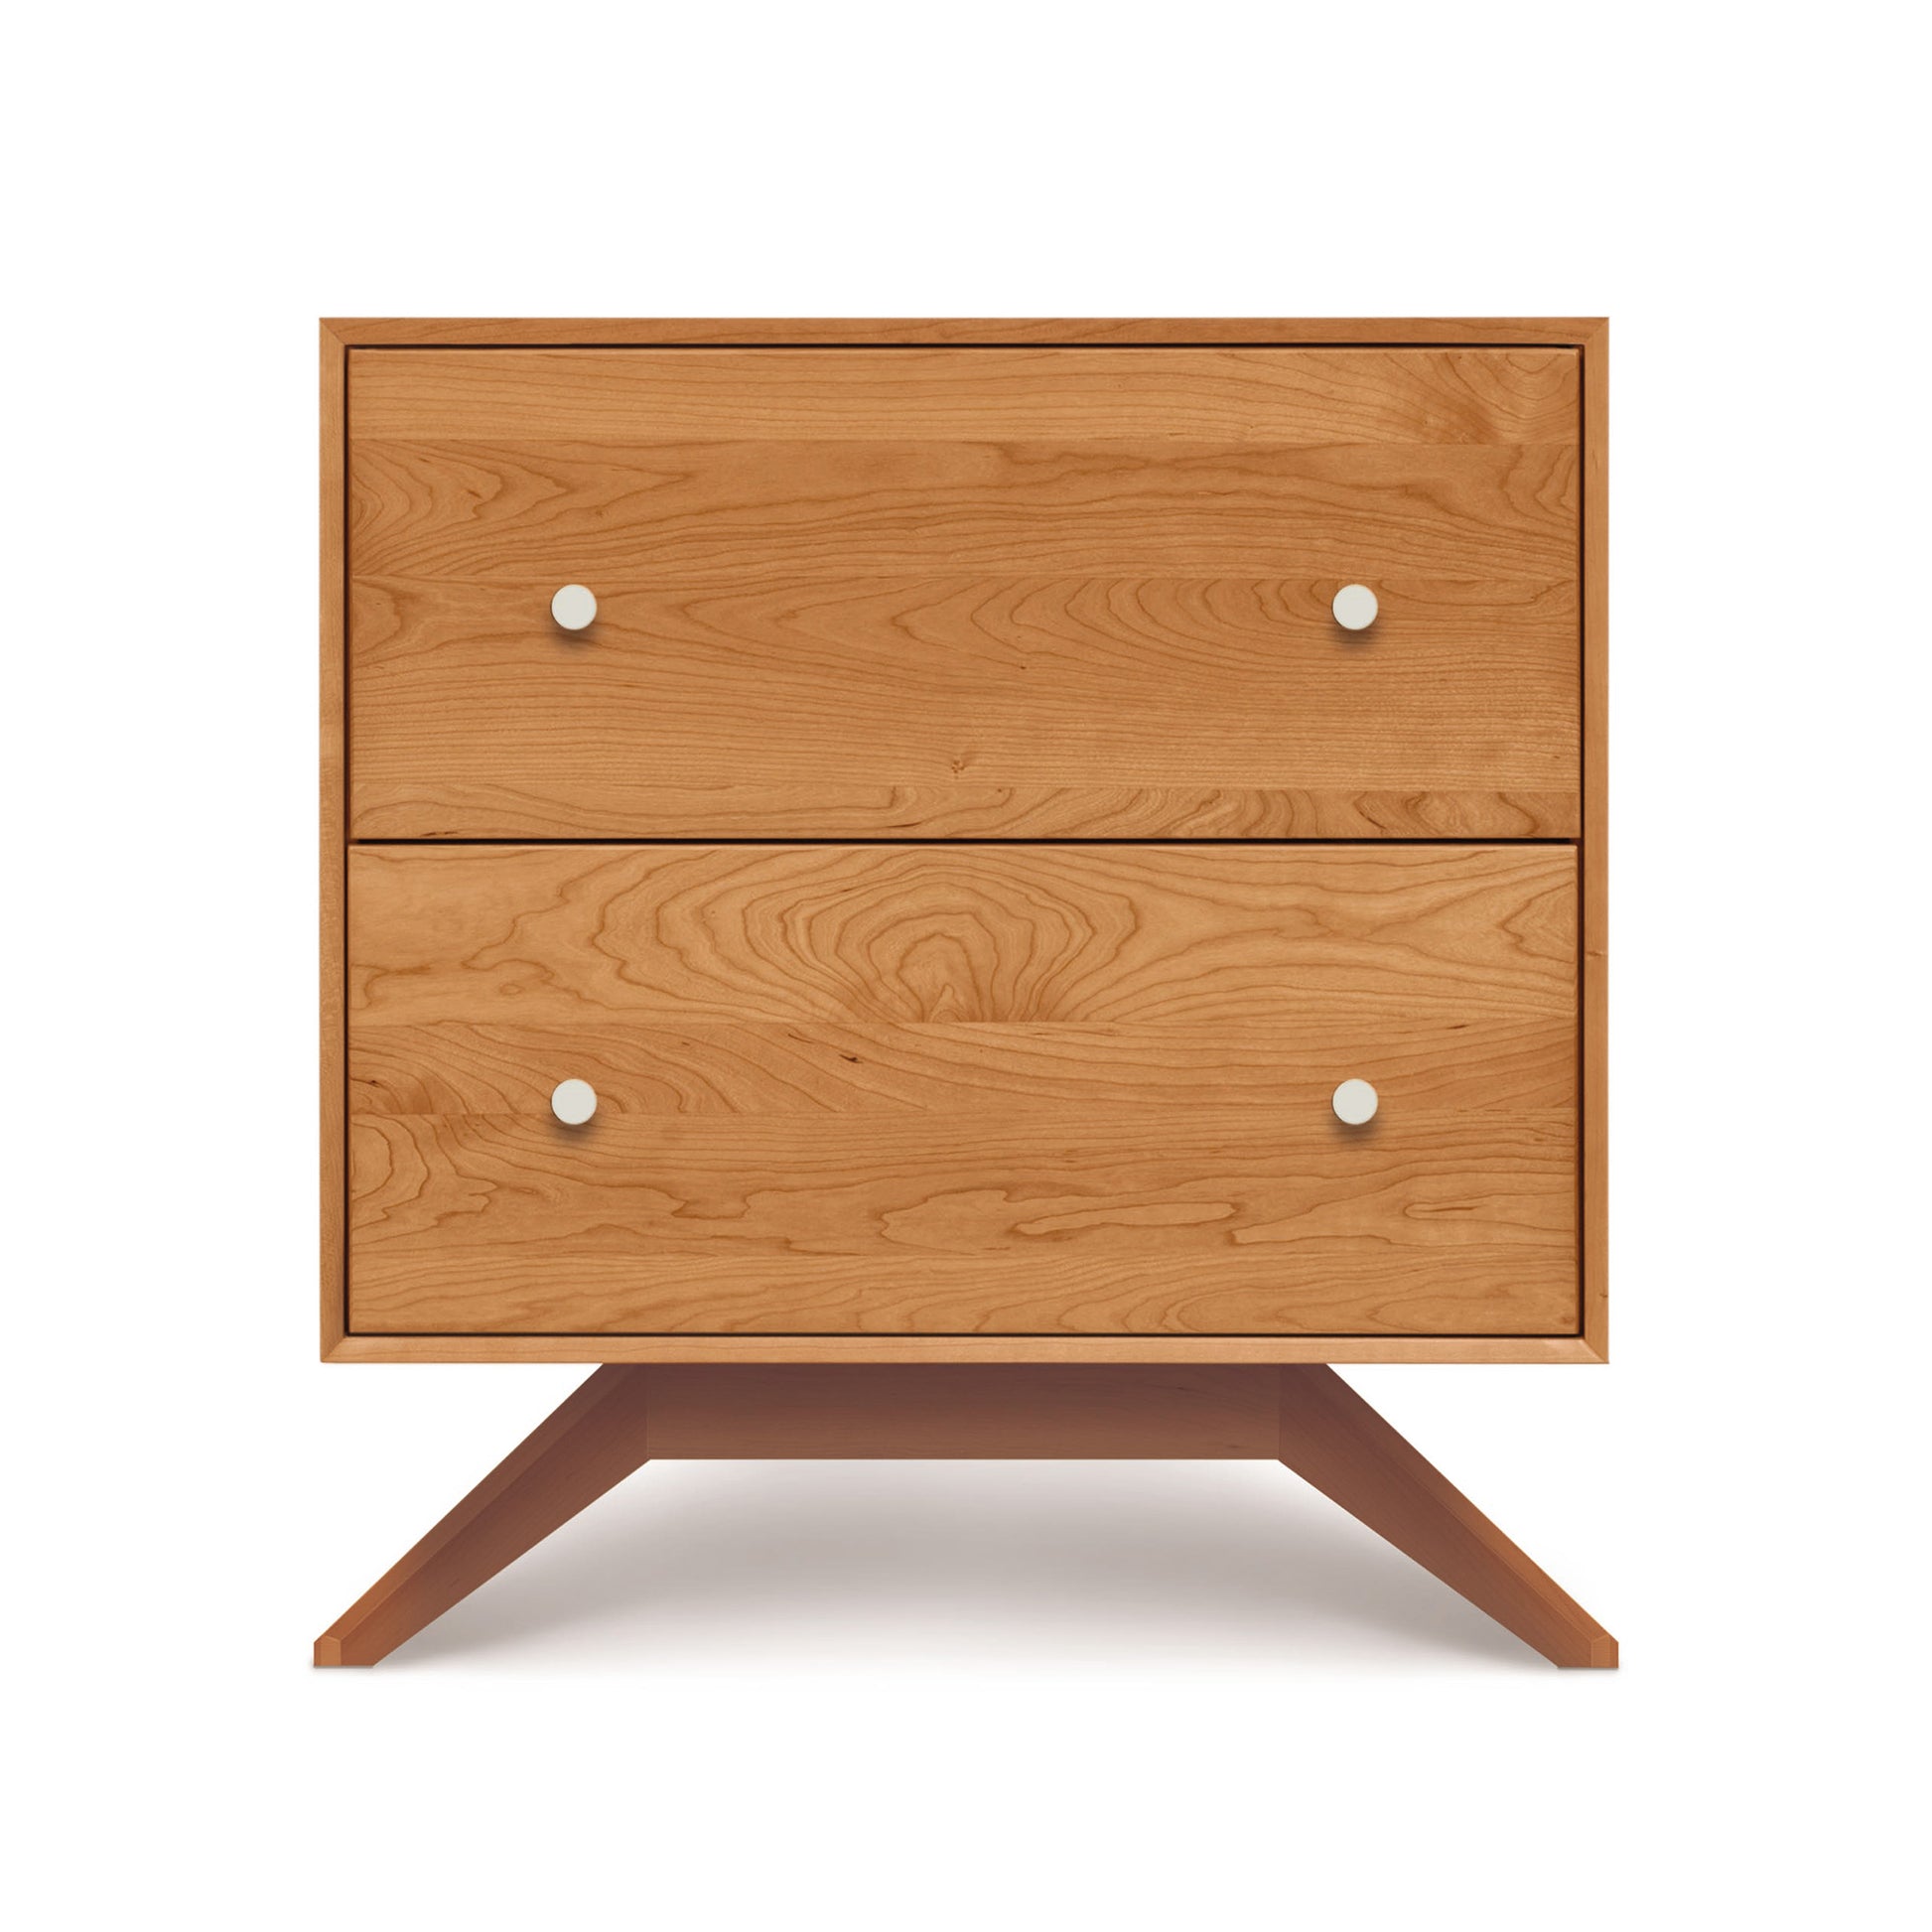 A Copeland Furniture Astrid 2-Drawer Nightstand with round white knobs standing on splayed legs against a white background.